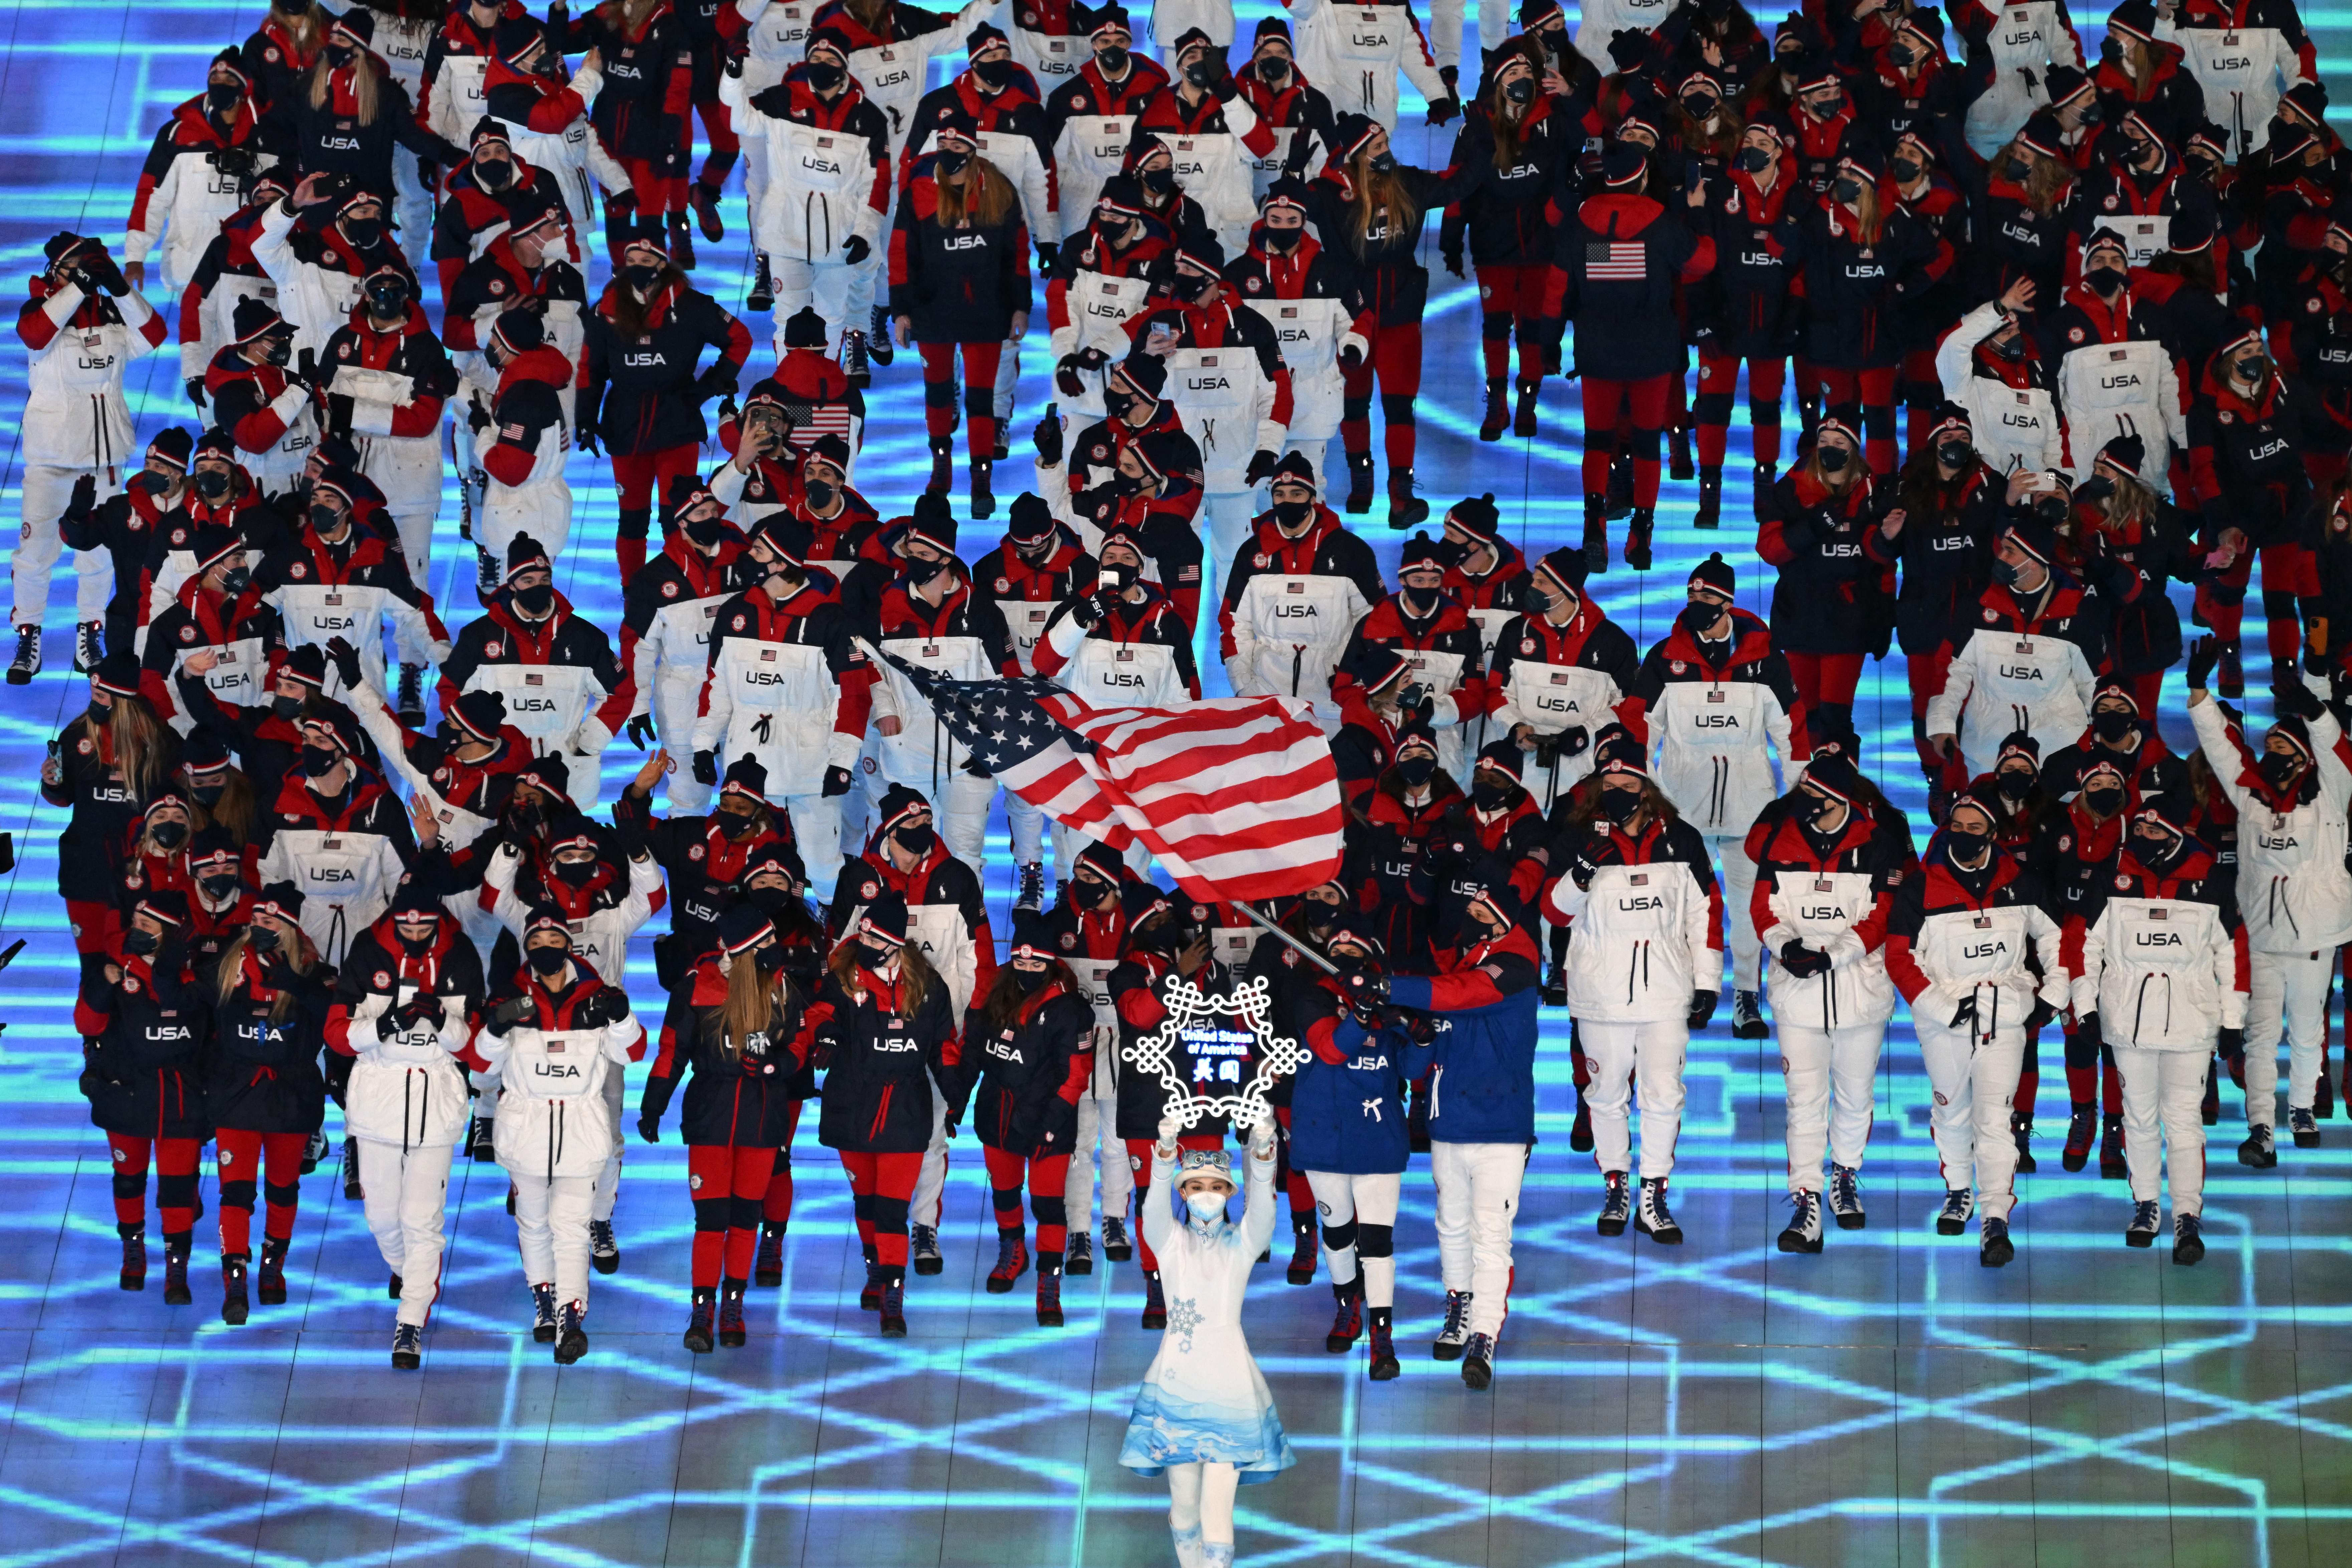 USA's flag bearers John Shuster and Elana Meyers Taylor lead the delegation as they enter the stadium.